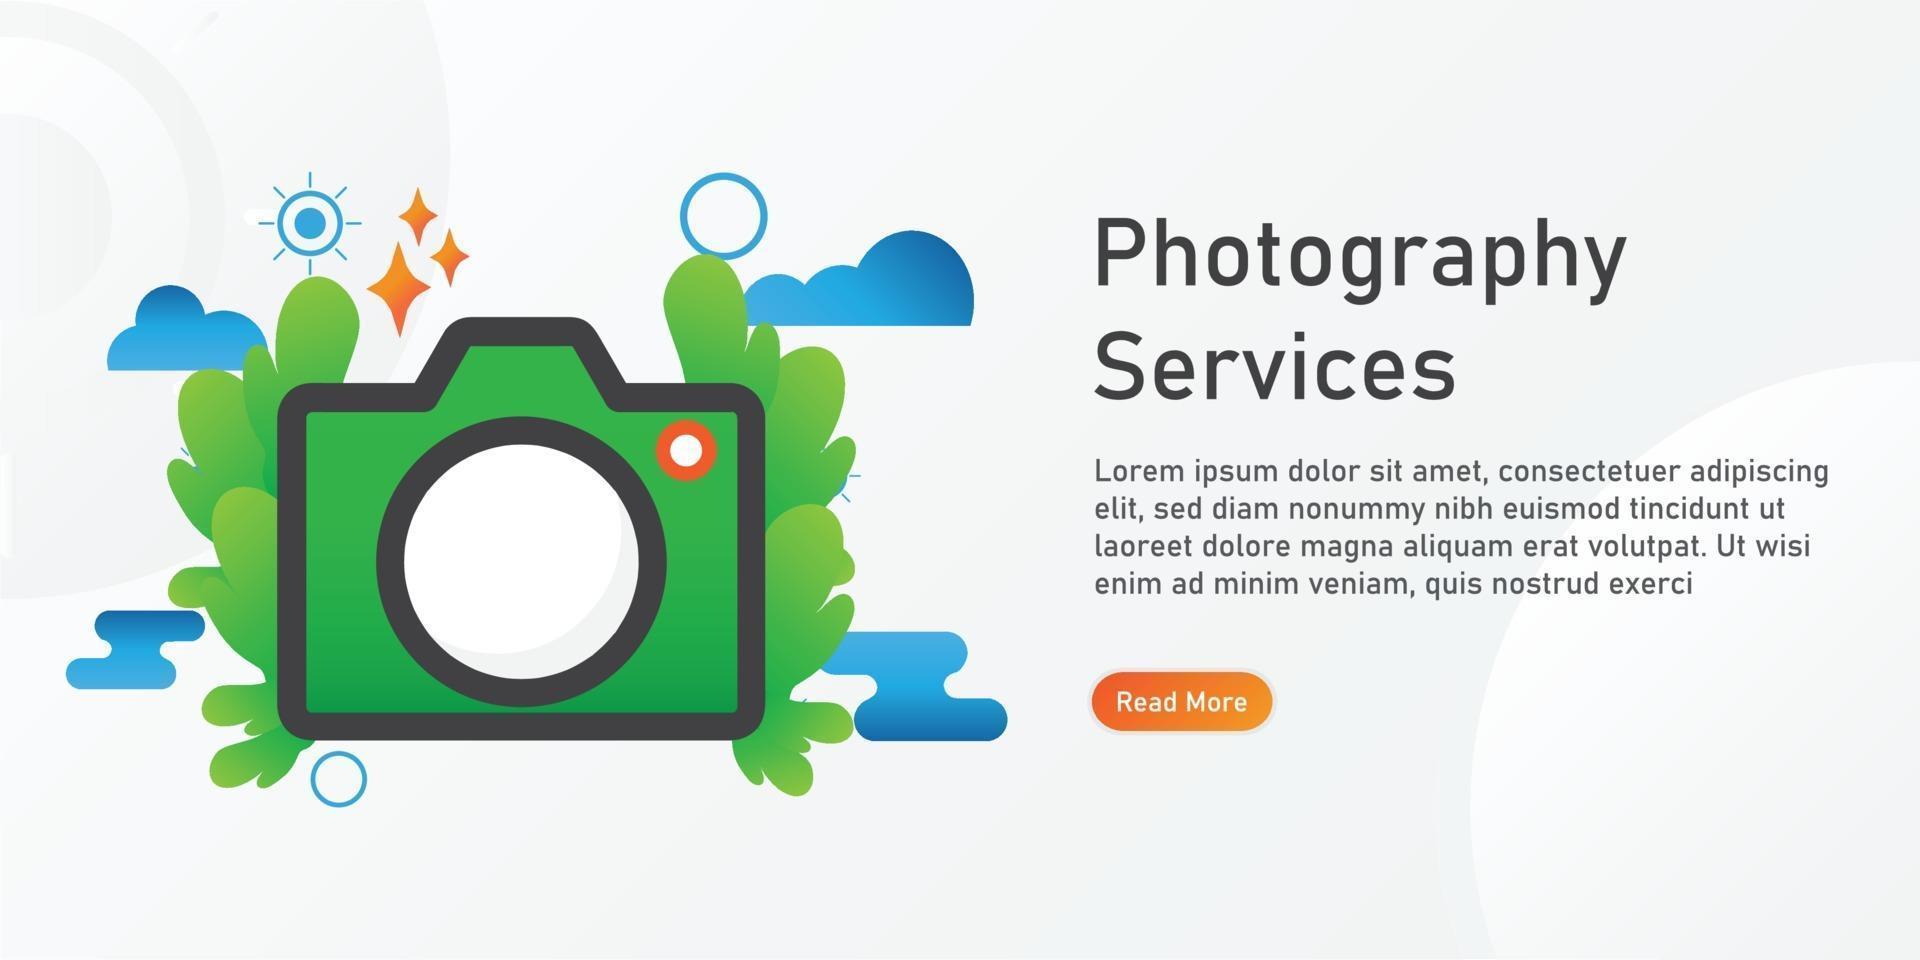 photography services Landing page template. creative website template designs. editable Vector illustration.